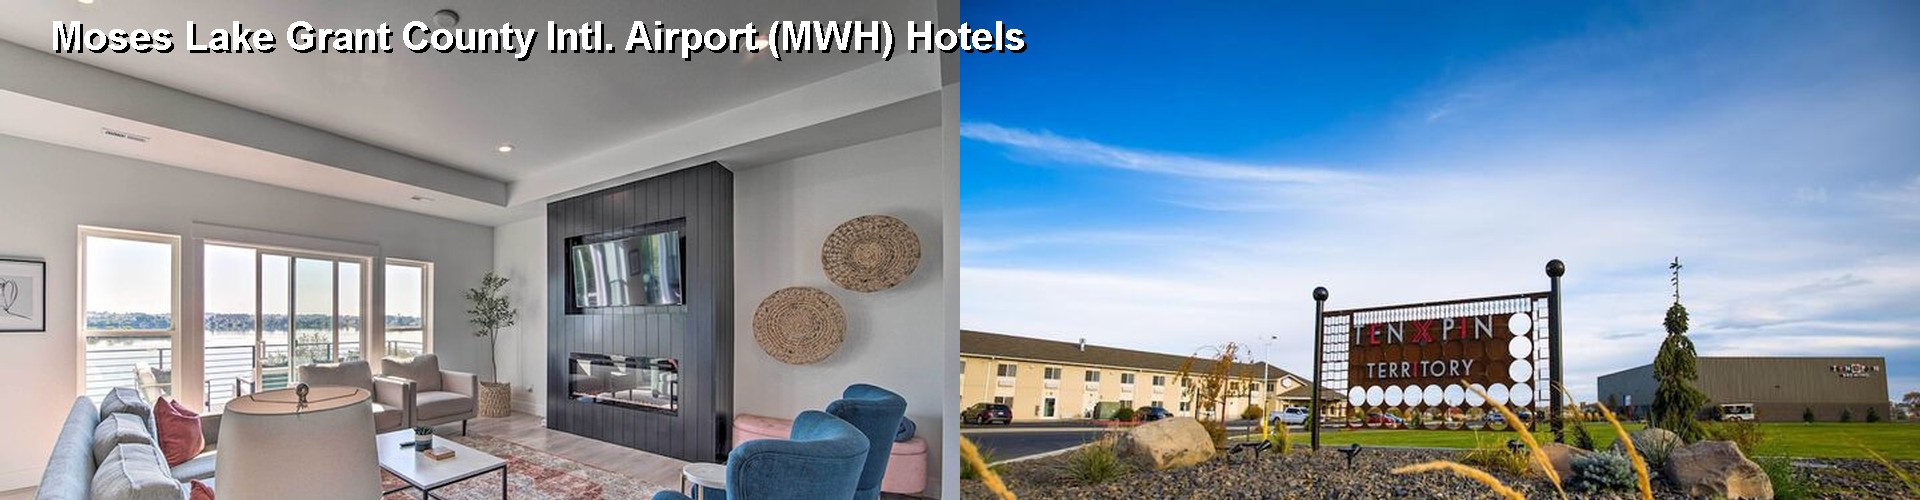 5 Best Hotels near Moses Lake Grant County Intl. Airport (MWH)